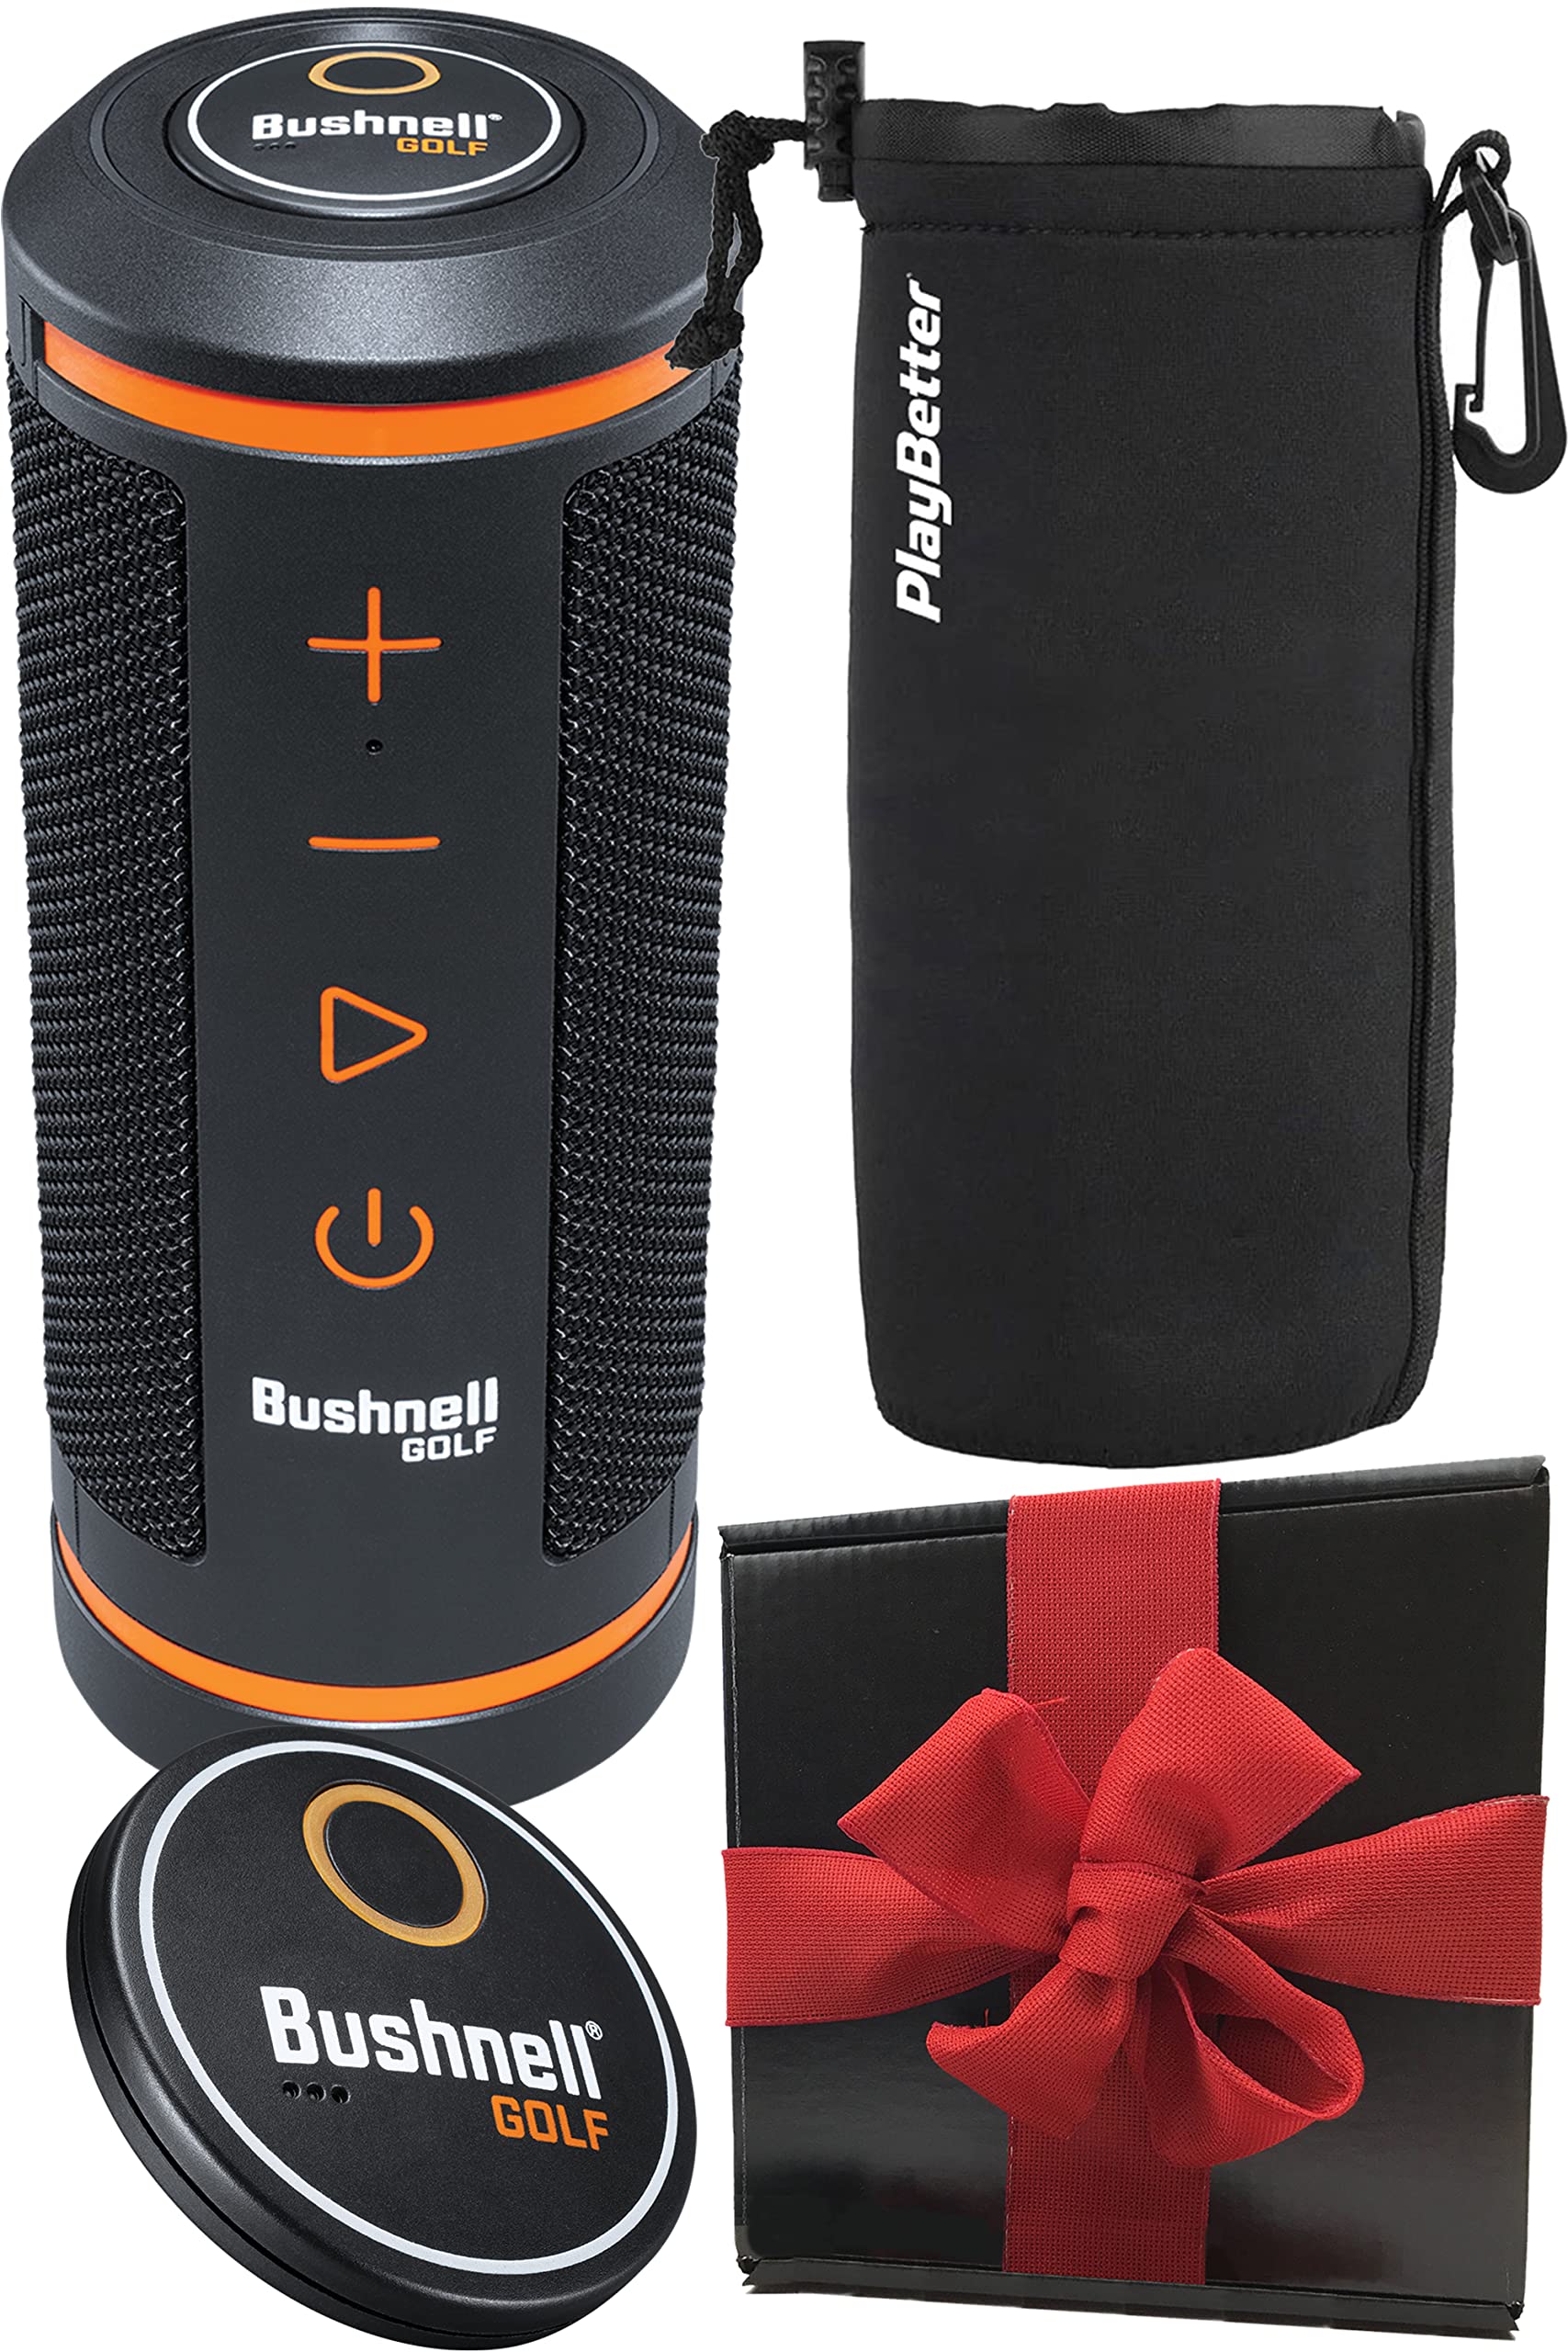 Bushnell Wingman GPS Golf Speaker Gift Box Bundle | Includes Wingman, Protective Wingman Pouch, Gift Box, Red Bow | Perfect Holiday Golf Gift | Bluetooth Music & Audible GPS Distances | 361910